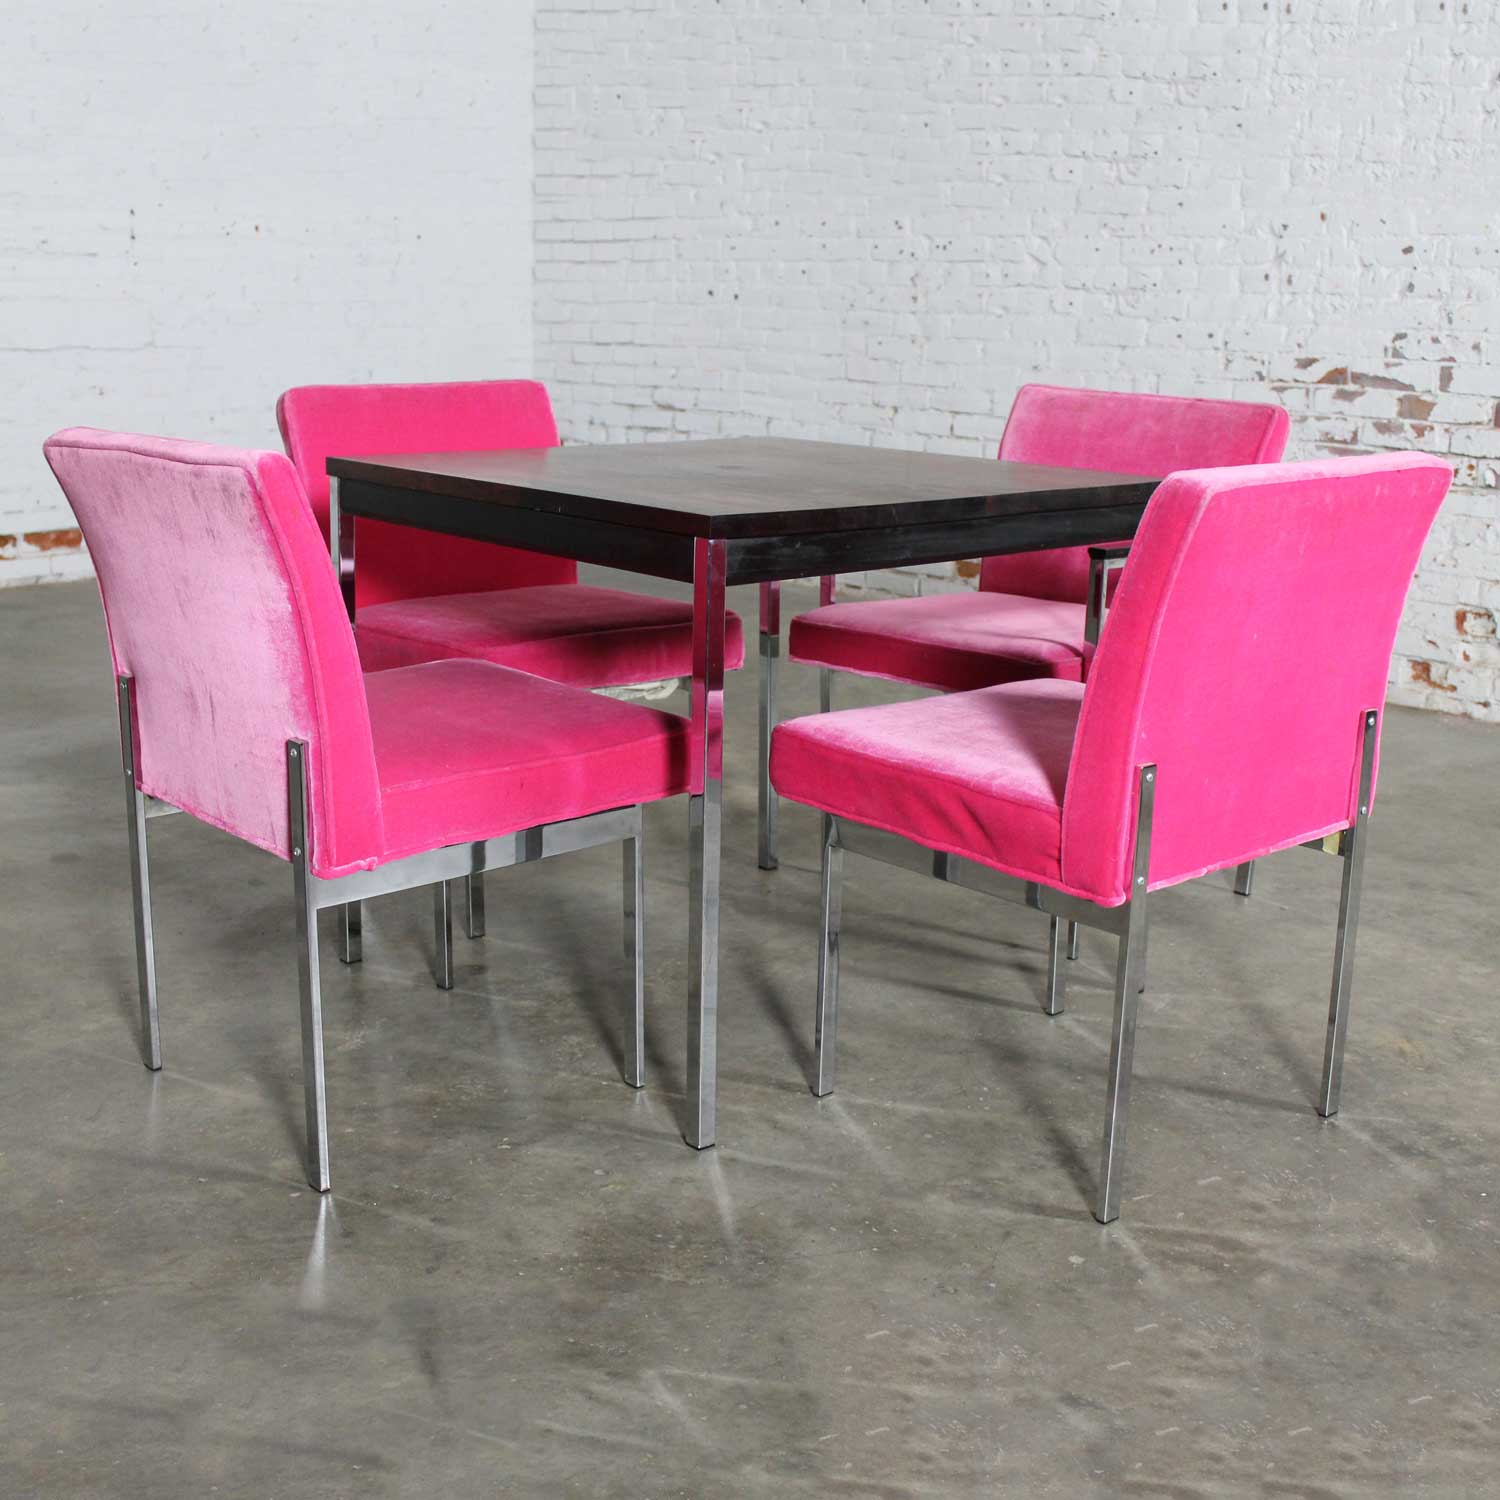 Hot Pink and Chrome Dining Chairs by American of Martinsville Vintage Mid Century Modern